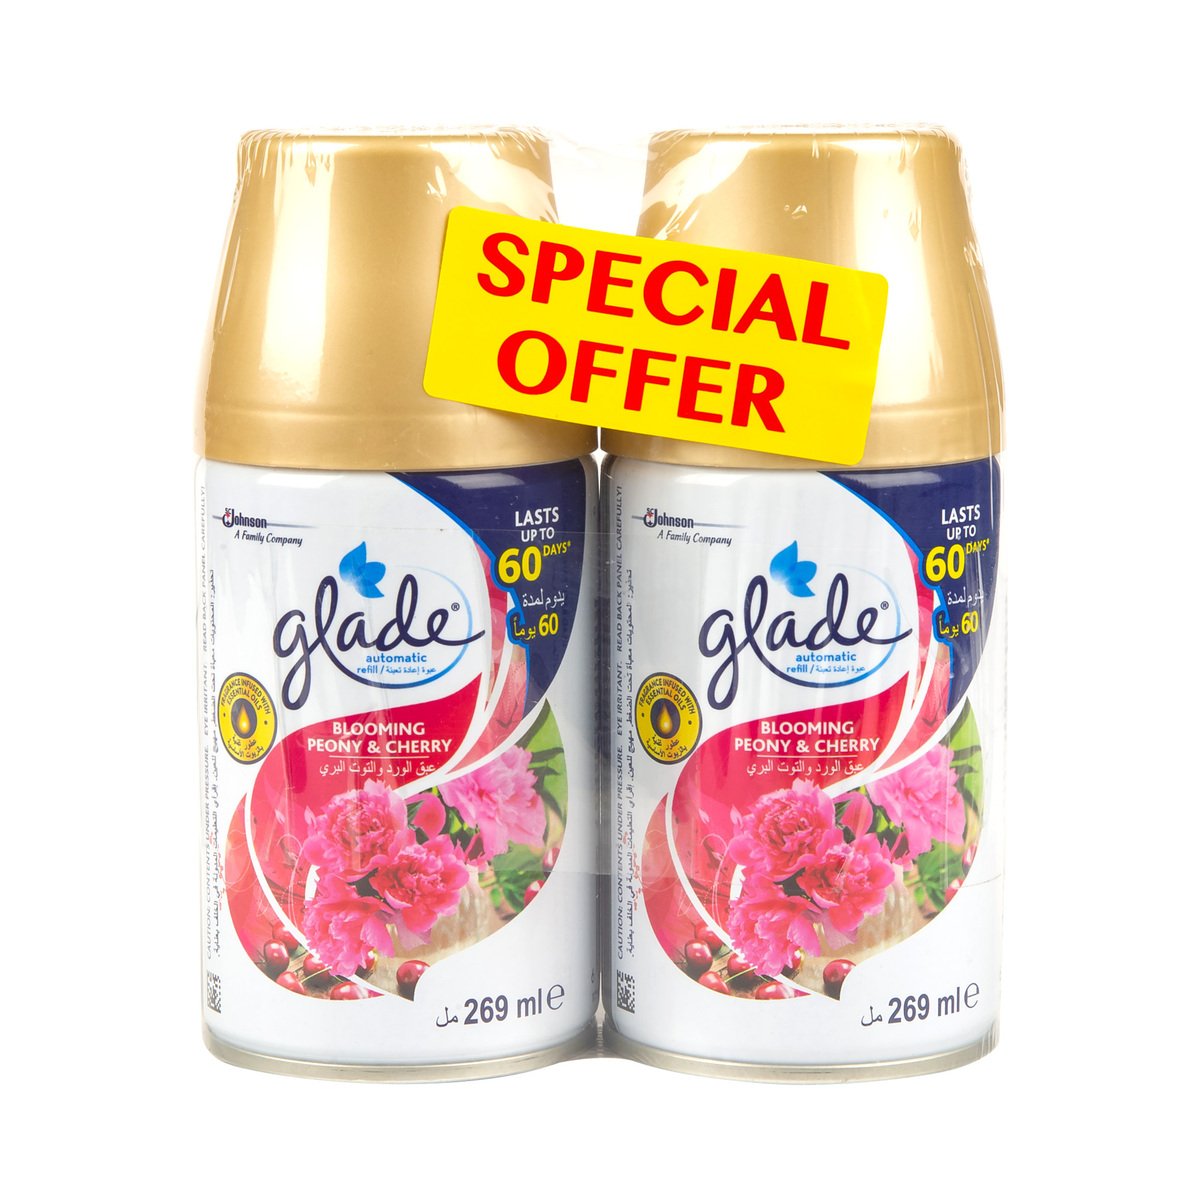 Glade Automatic Refill Blooming Peony & Cherry Value Pack 2 x 269 ml